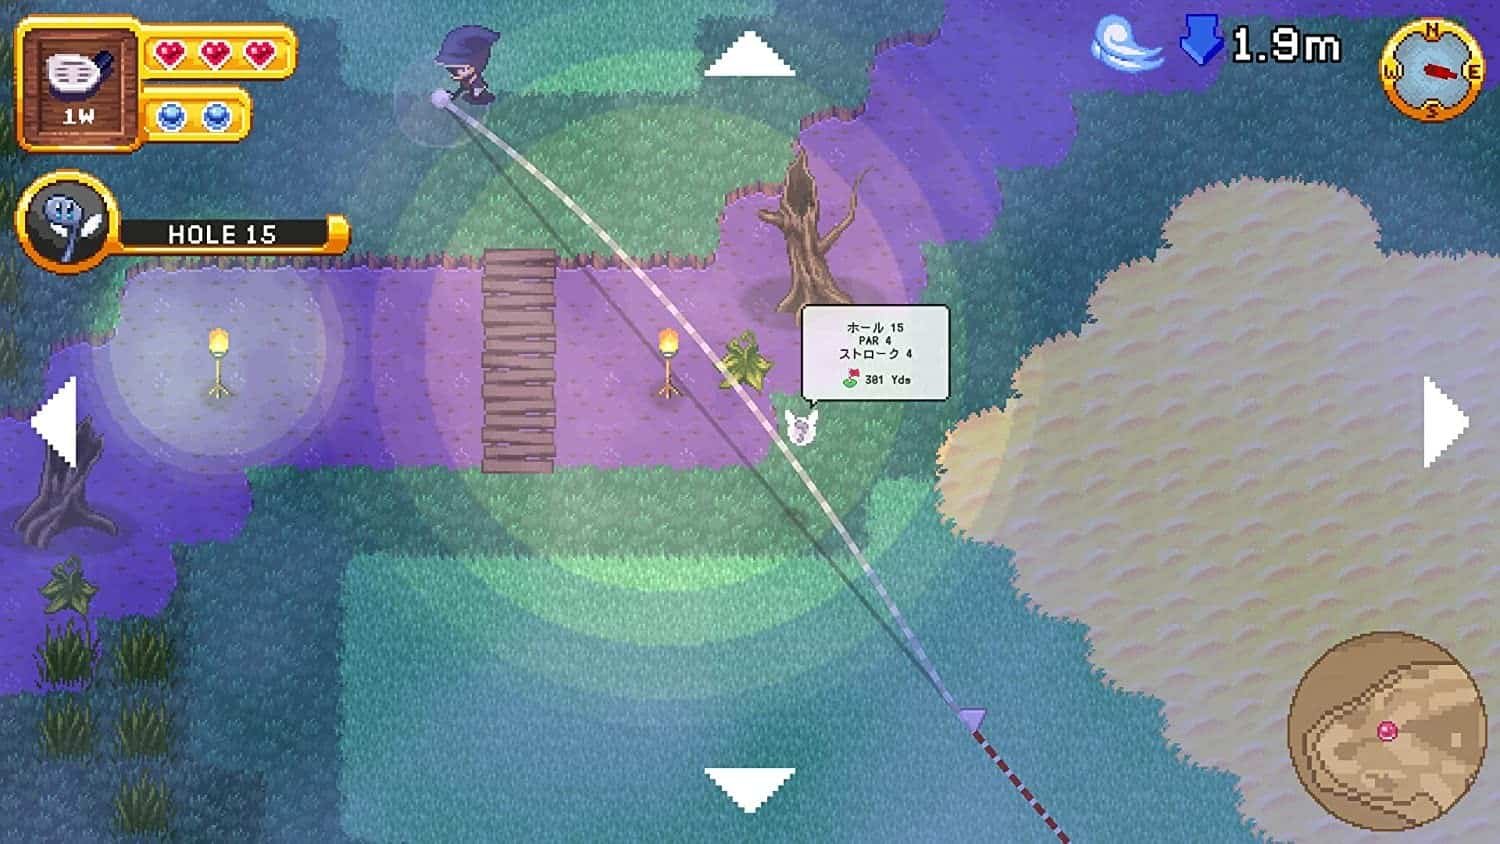 RPGolf Legends (English), RPG Golf Legends, Golf Legends, RPGolf Legends, Kemco, ArticNet, Nintendo Switch, Switch, PS4, PlayStation 4, release date, game overview, pre-order, Japan, price, trailer, screenshots, features